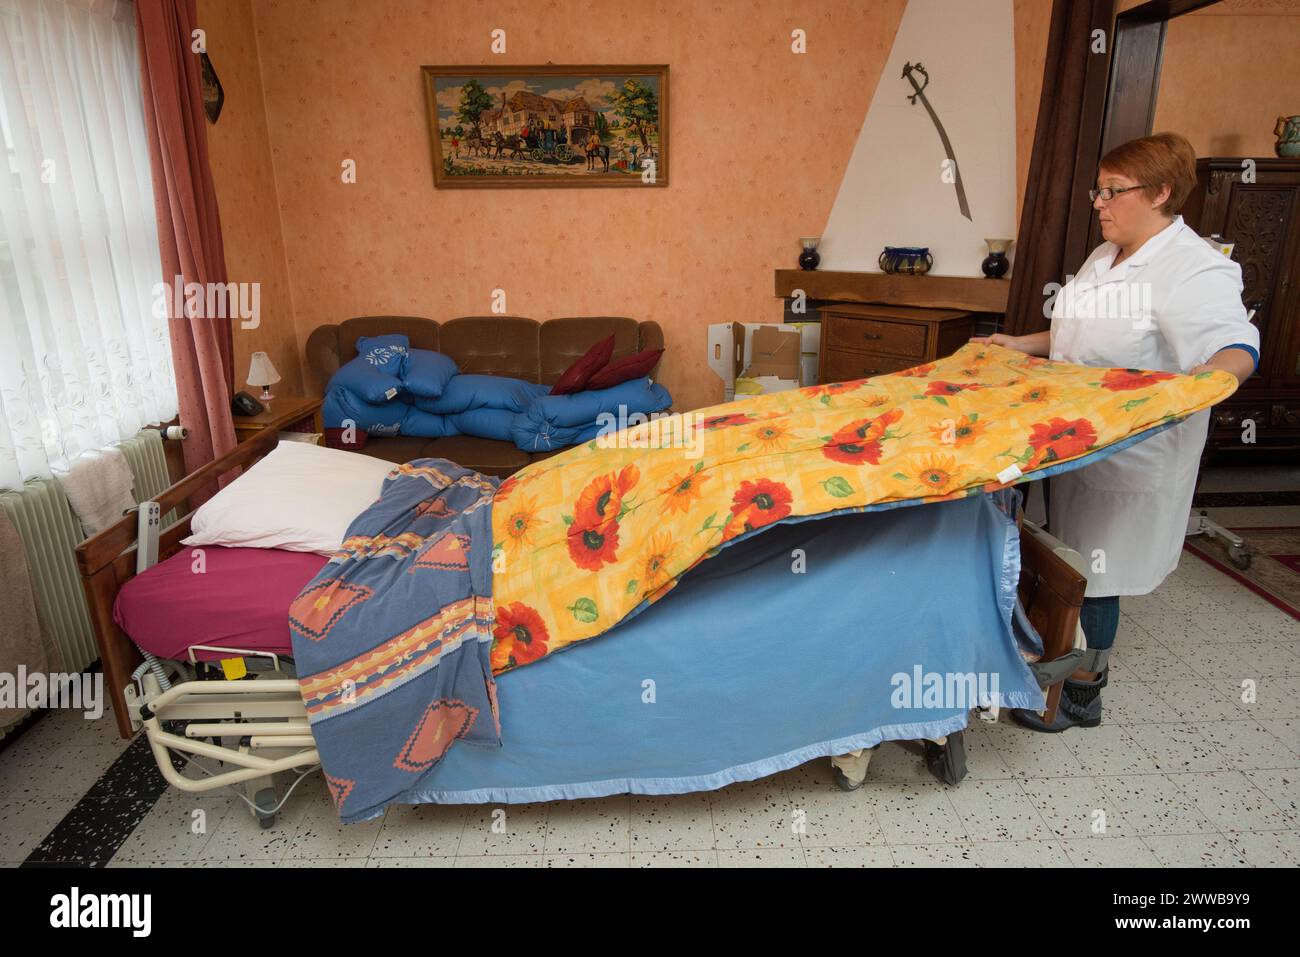 HAD (Hospitalization At Home). Follow-up of an elderly patient at her home by a caregiver. Nursing assistant making the bed. Stock Photo